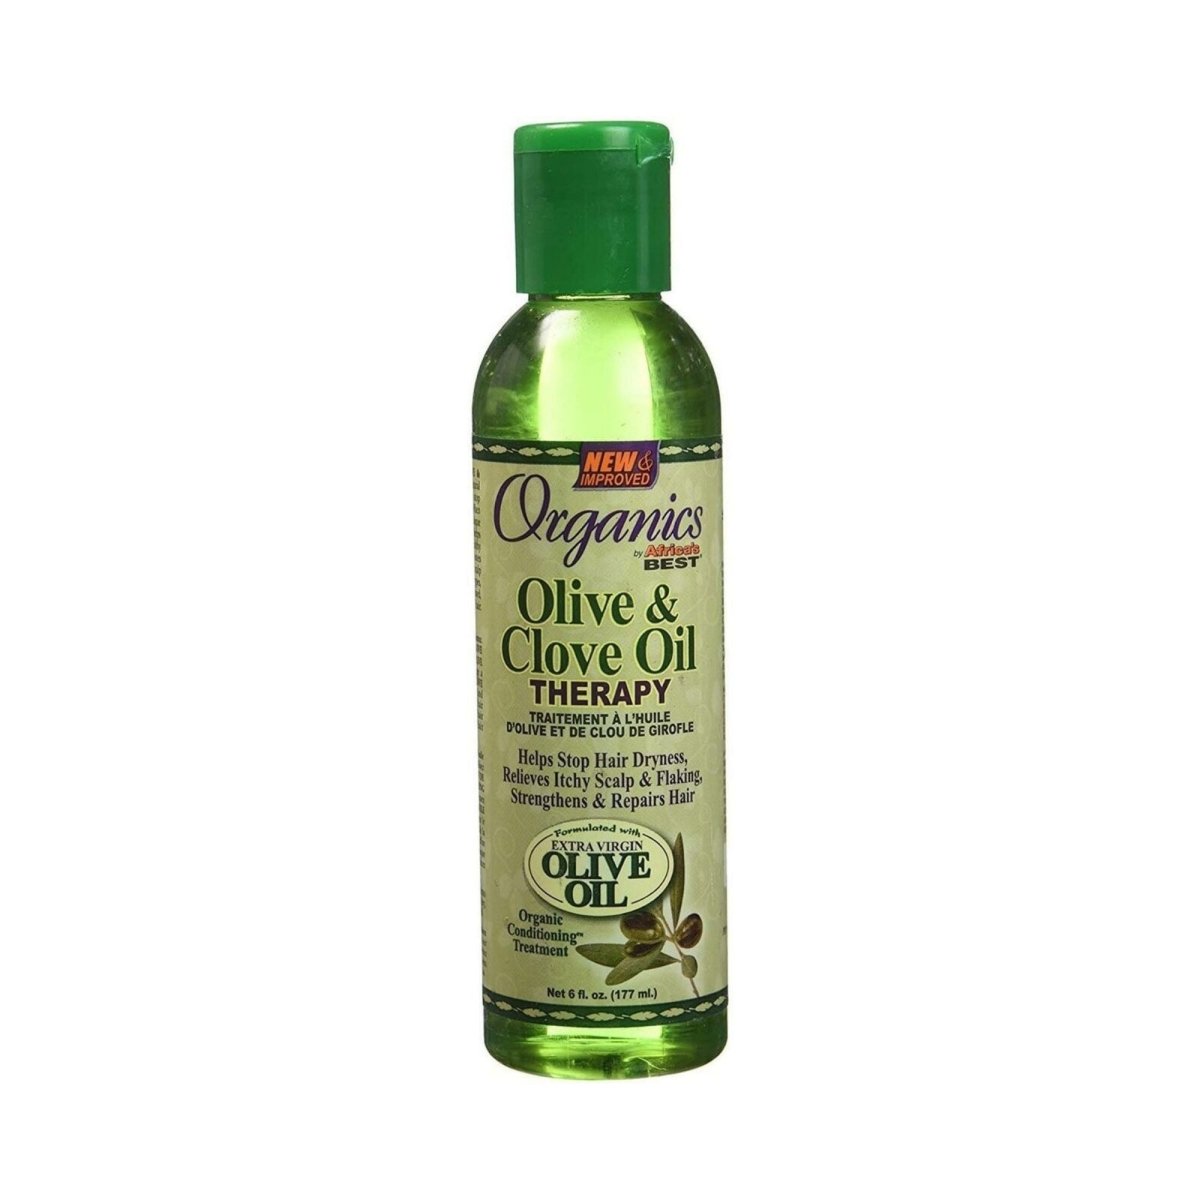 Africa's Best Organics Olive & Clove Oil Therapy 6oz - Southwestsix Cosmetics Africa's Best Organics Olive & Clove Oil Therapy 6oz Hair Oil Africa's Best Southwestsix Cosmetics 034285543068 Africa's Best Organics Olive & Clove Oil Therapy 6oz